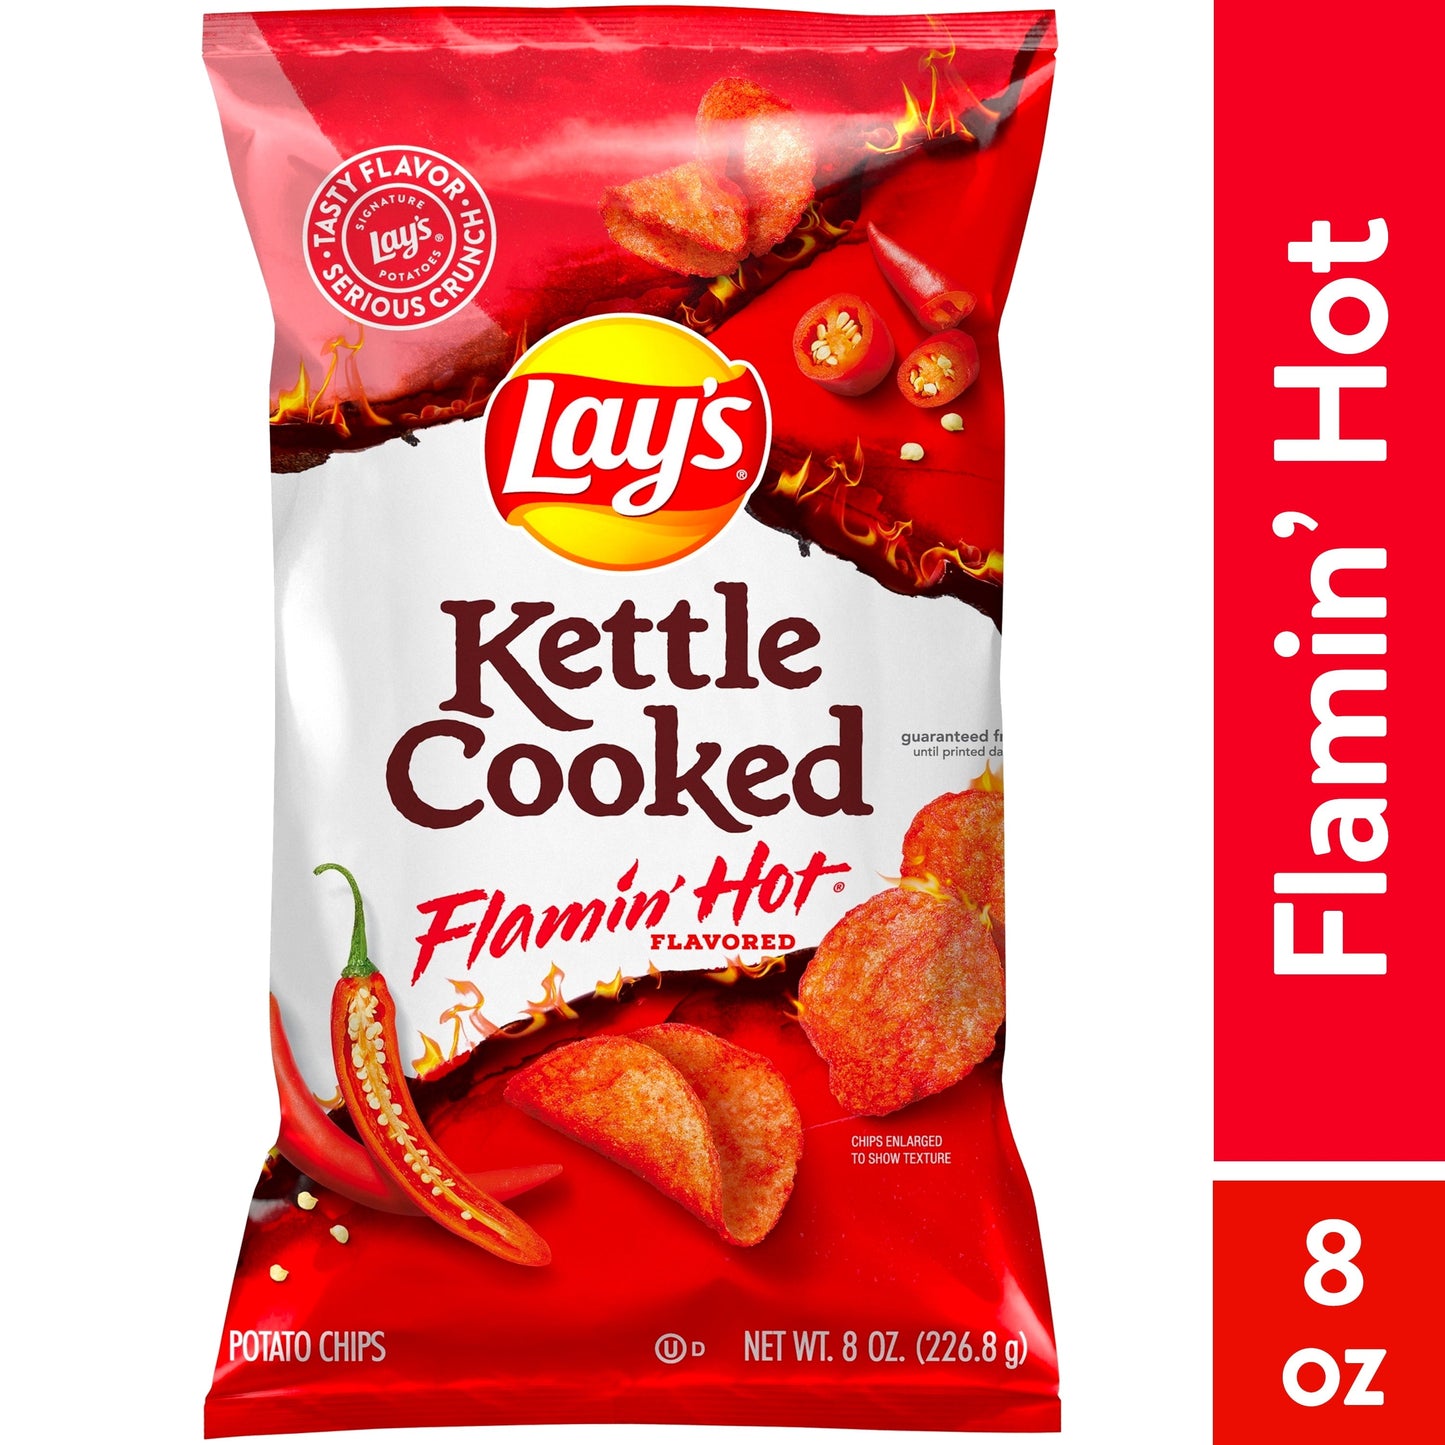 Lay's Kettle Cooked Flamin' Hot Flavored Potato Chips, 8 oz Bag